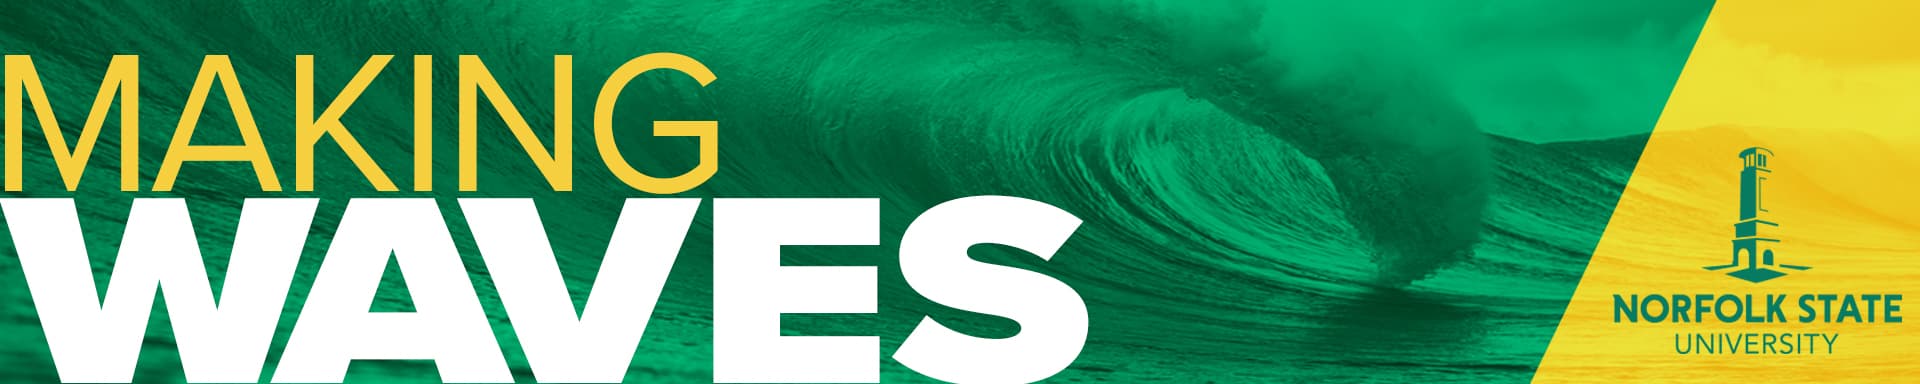 the Making Waves banner image